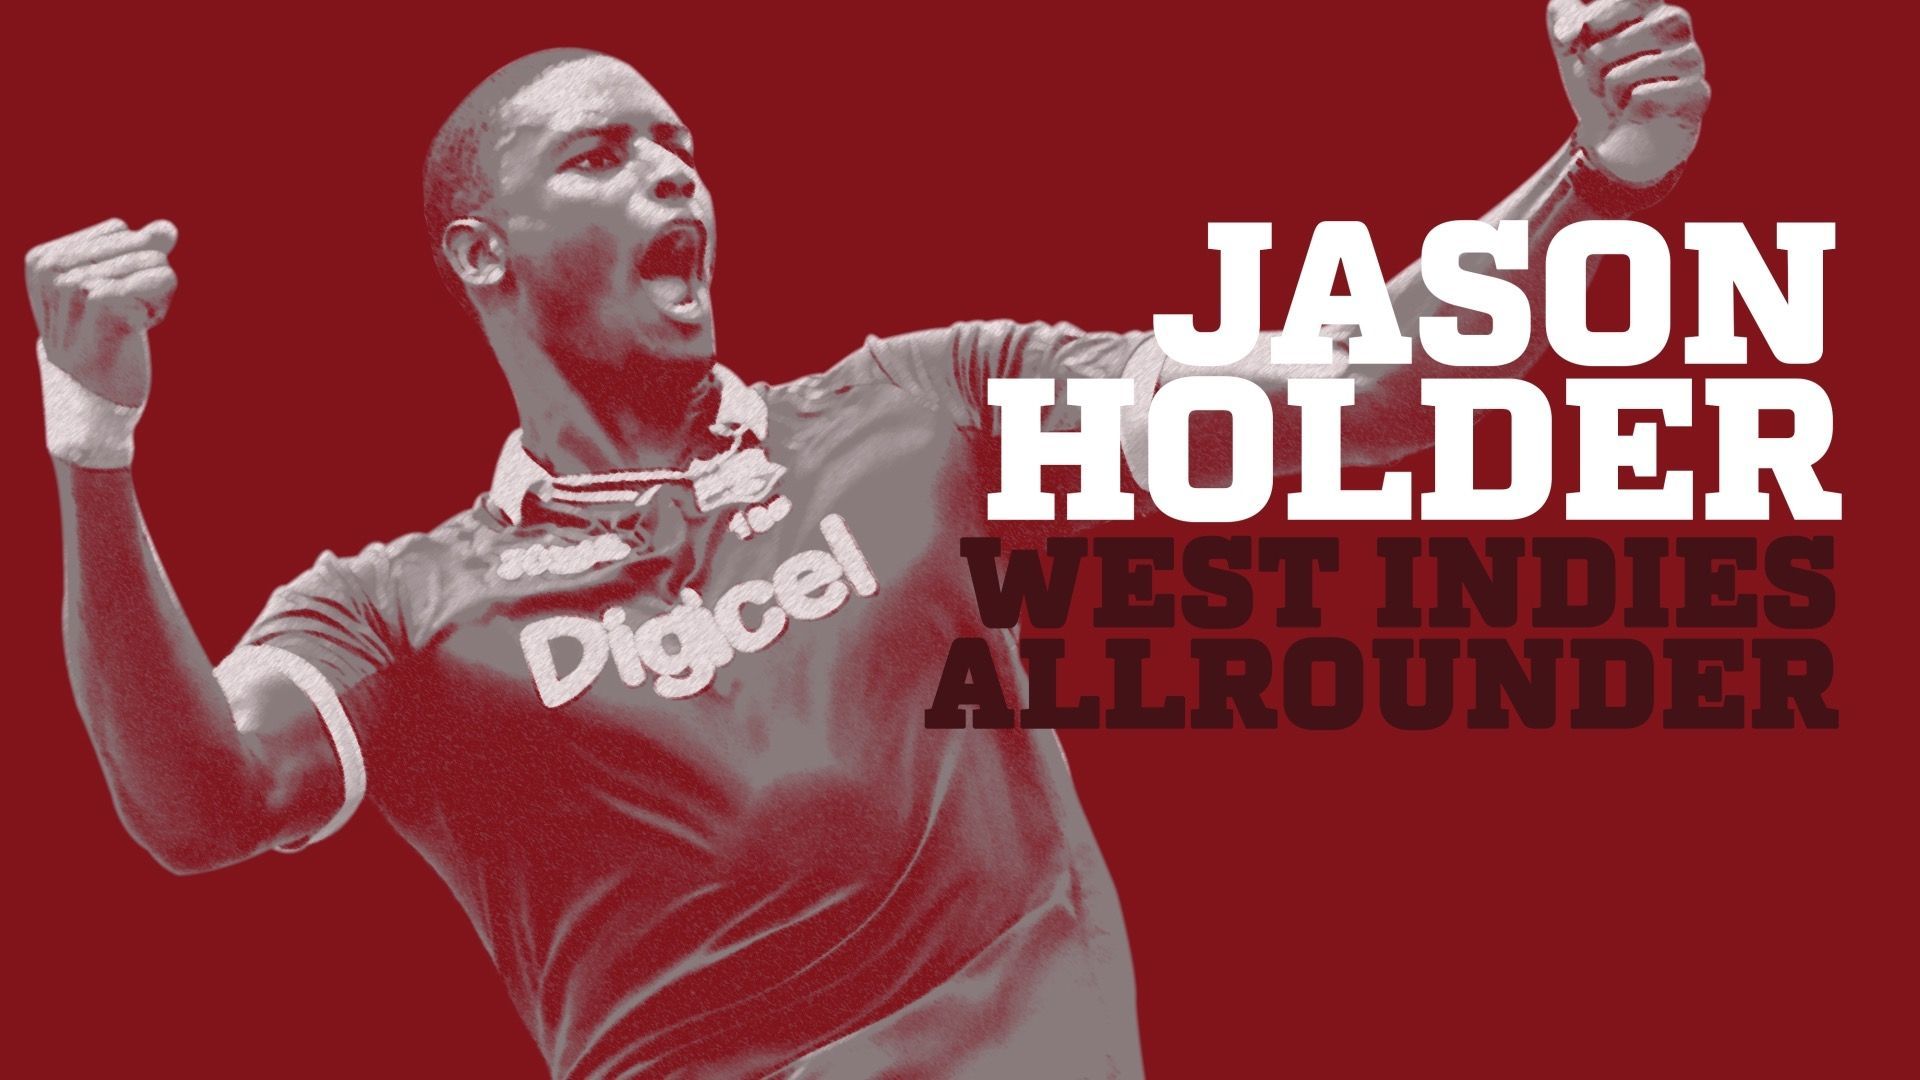 Player of the year, West Indies: Jason Holder